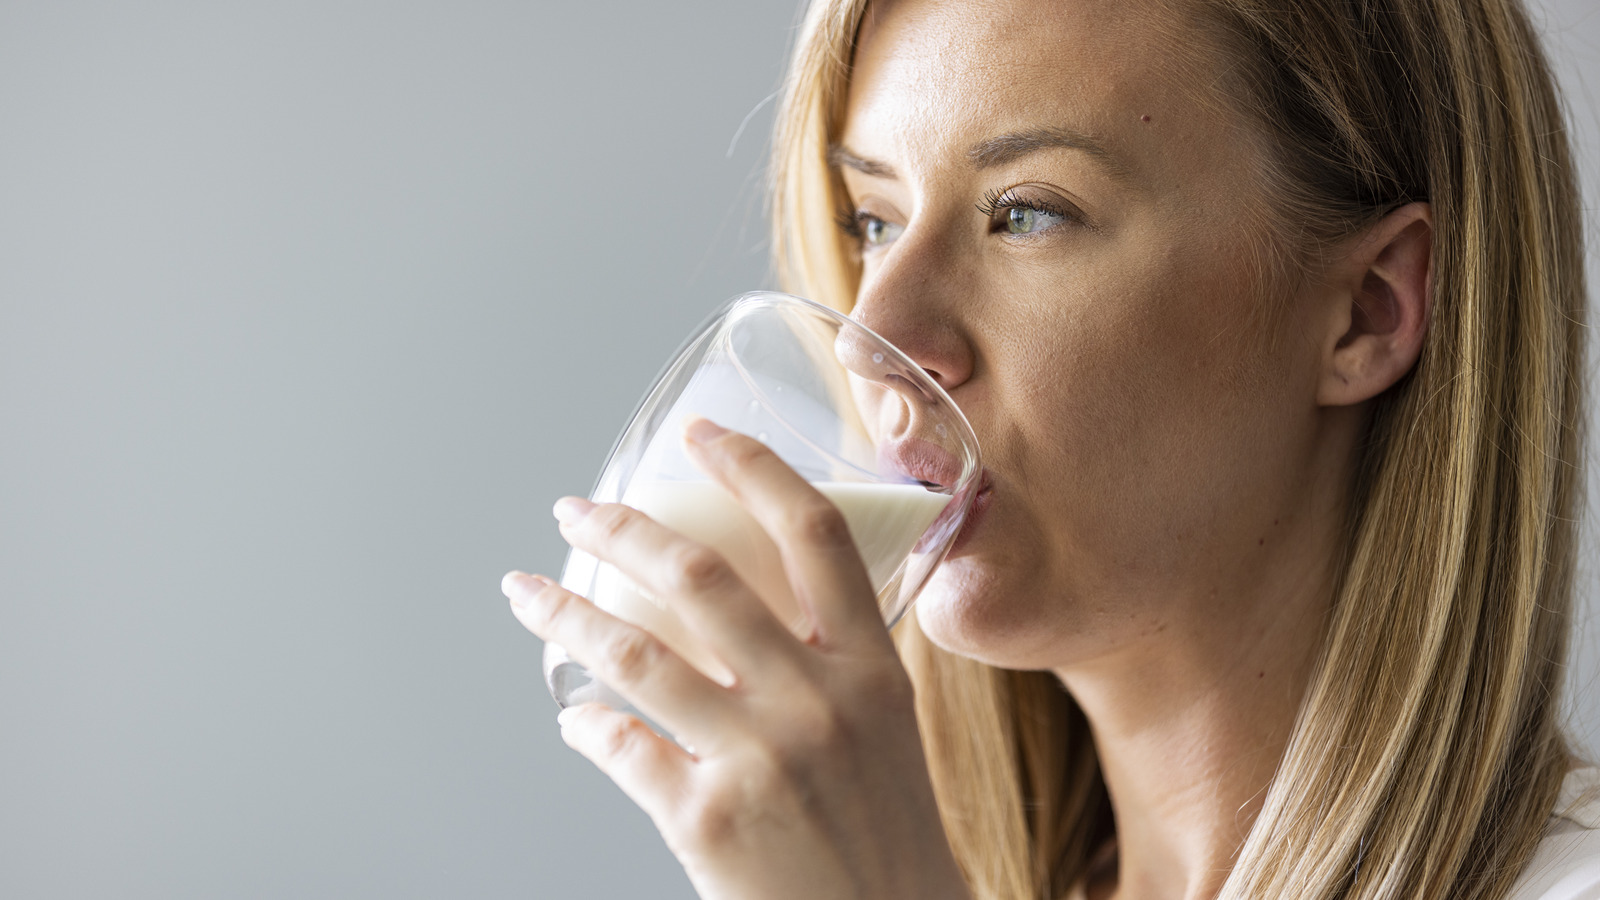 Here’s What Happens When You Take A Sip Of Spoiled Milk – Health Digest